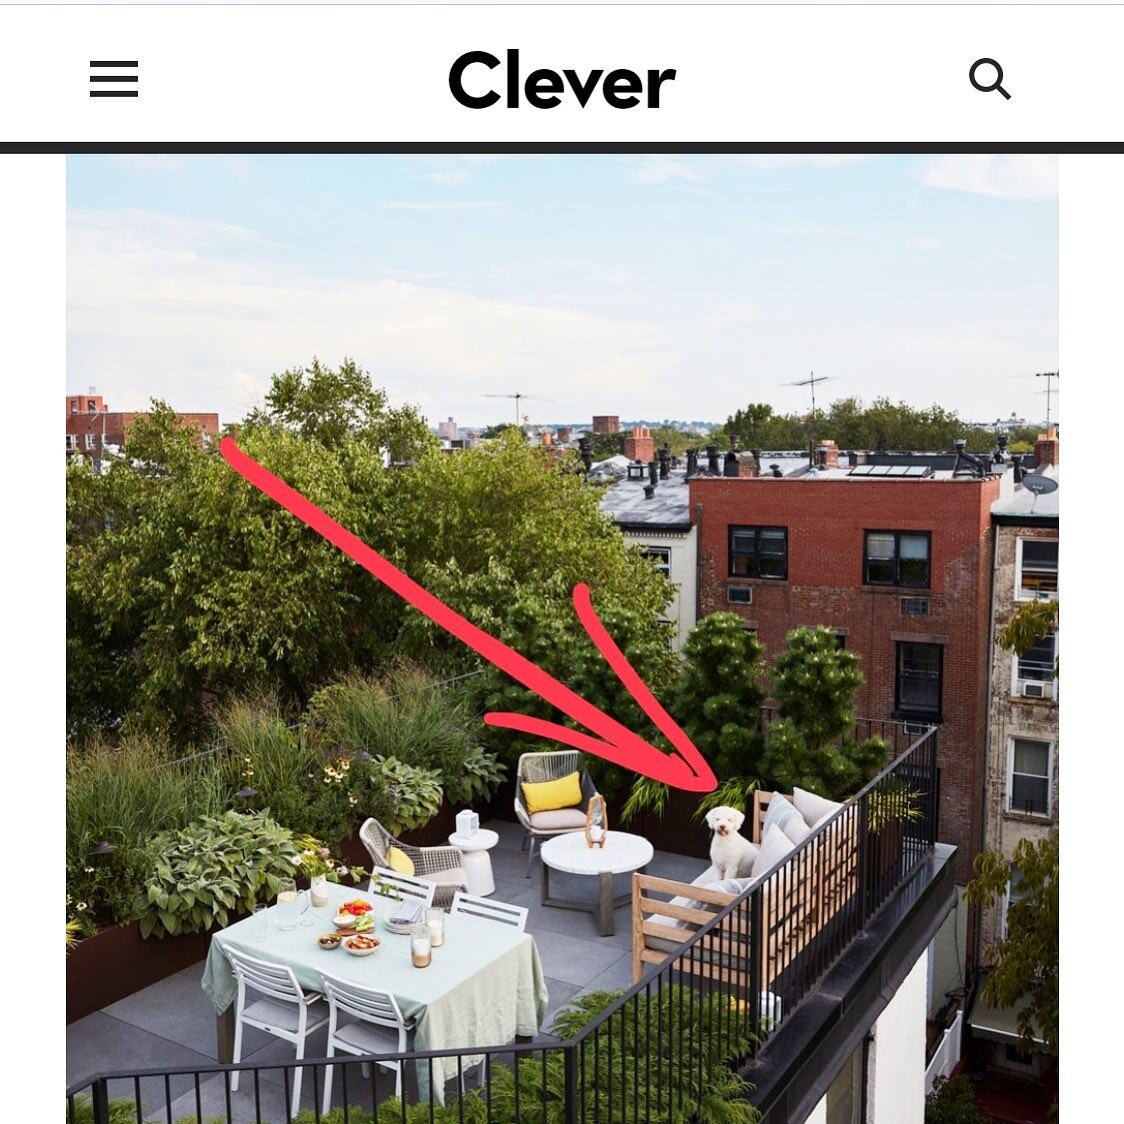 Look who&lsquo;s starring in Architectural Digest&rsquo;s Clever today with us! 🐶 
@nathanlump @lagotto_marco and I love the way this project turned out. Check out the story about our recent Brooklyn apt renovation on @getclever / @archdigest site, 